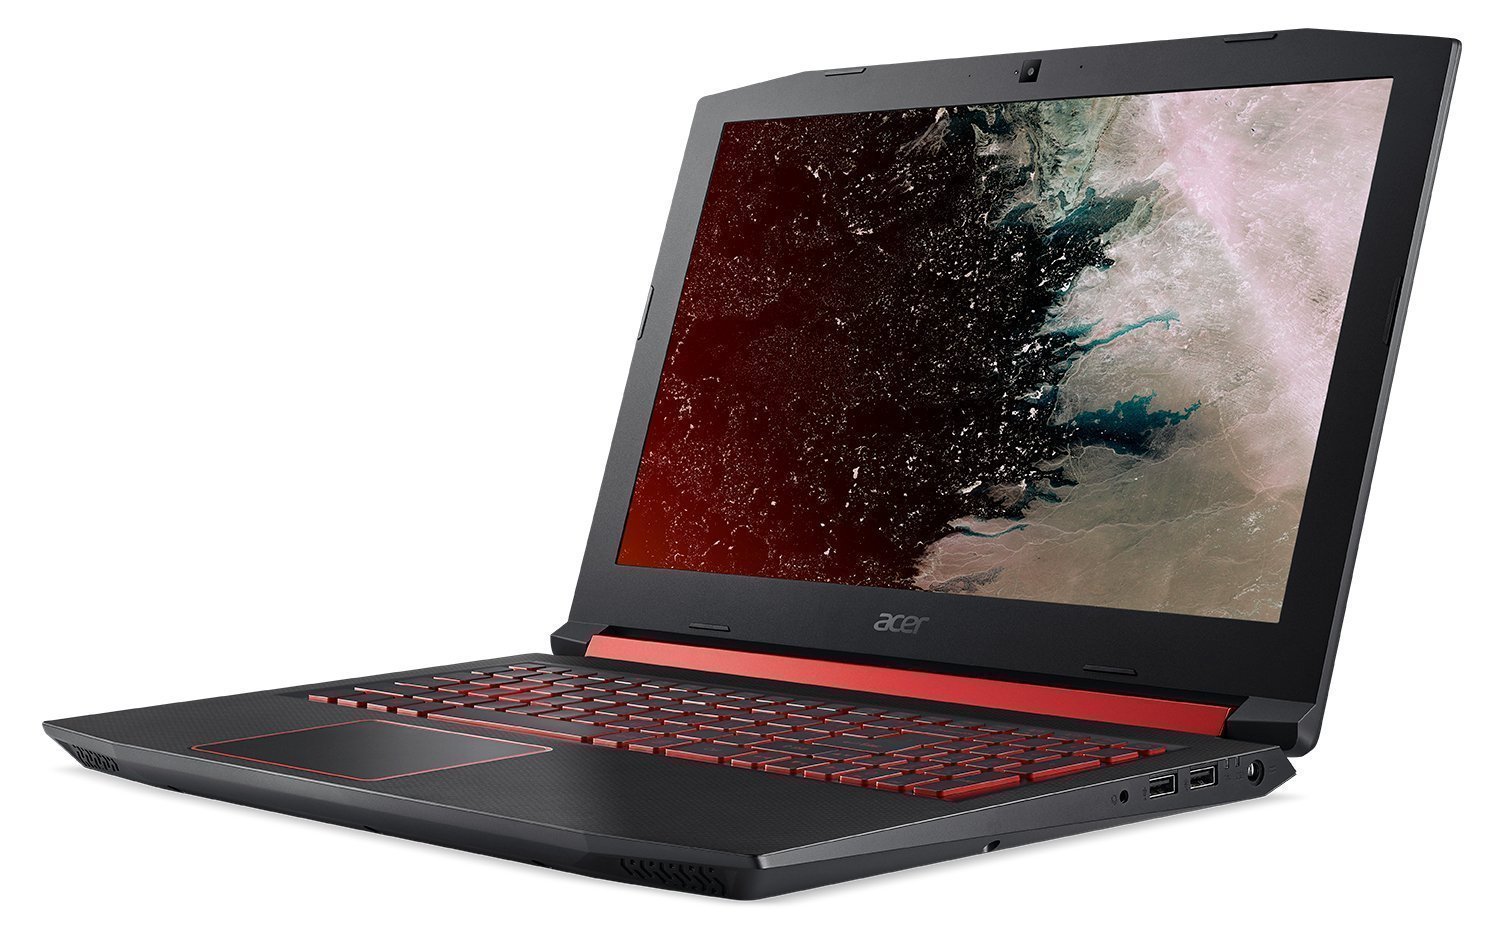 Acer nitro 5 Laptop shows earphones as speakers and I cannot separate their volumes 37da50c5360041999e107912092938c7.jpg